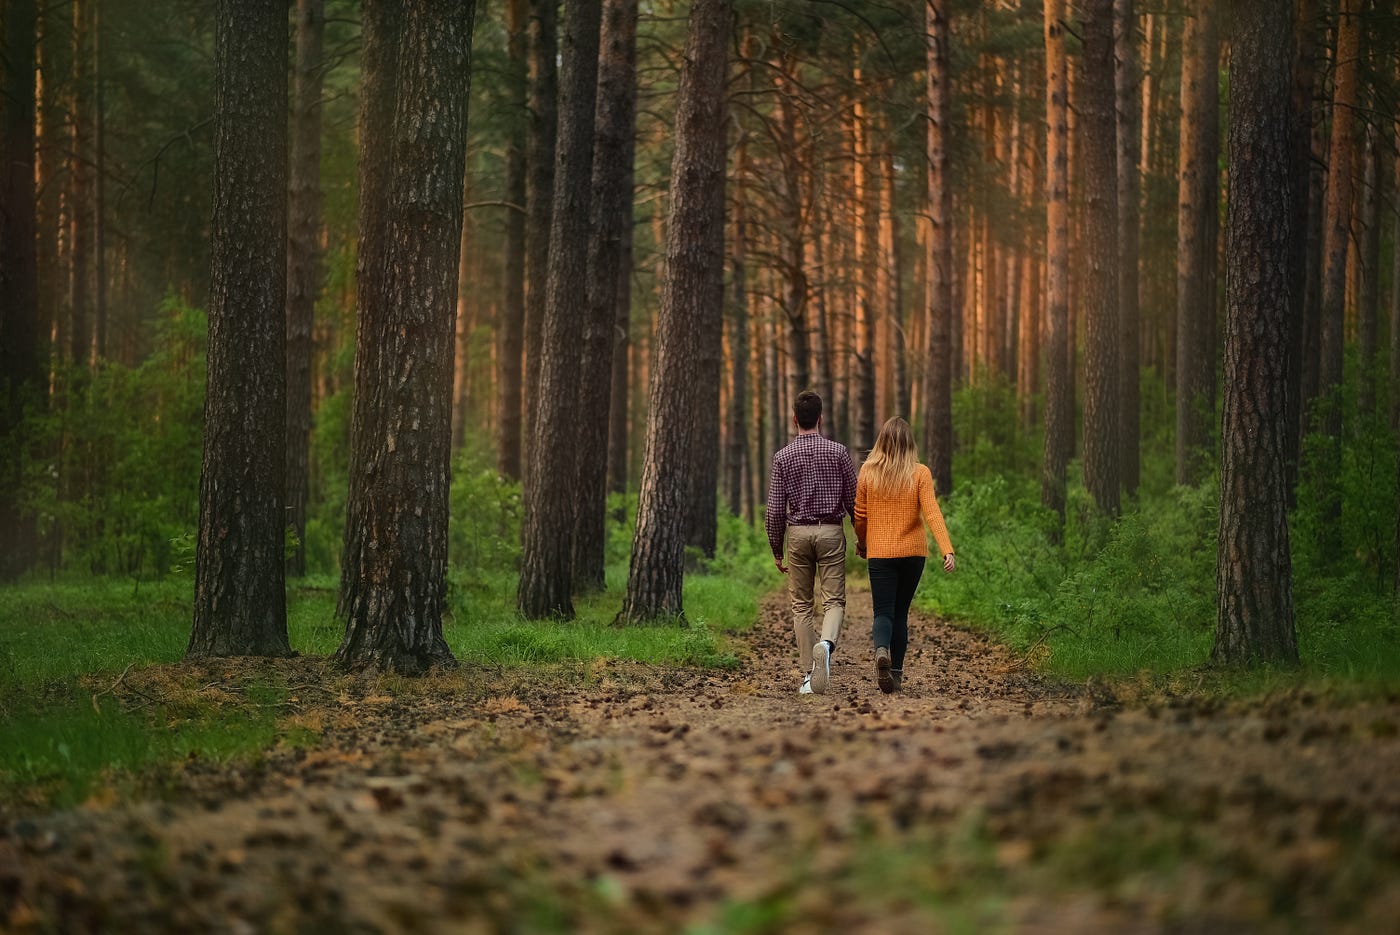 A Walk Through the Woods. A Poem | by J.W. Parr | P.S. I Love You